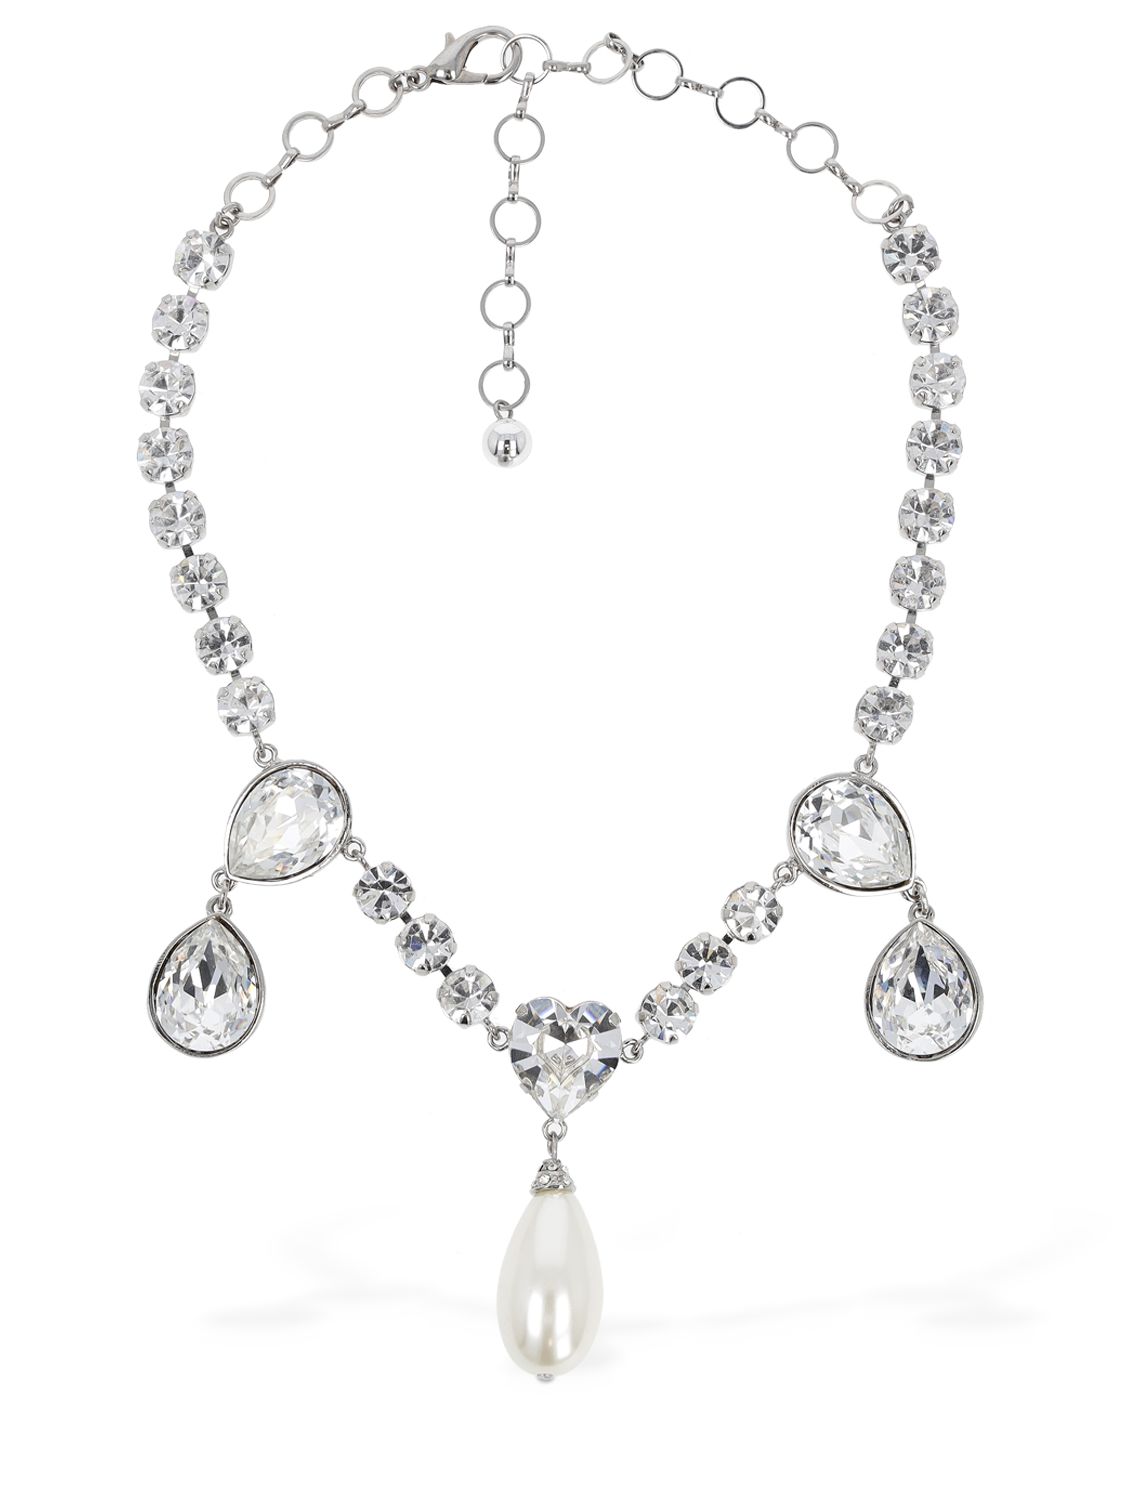 Necklace W/ Crystal & Faux Pearl Drops